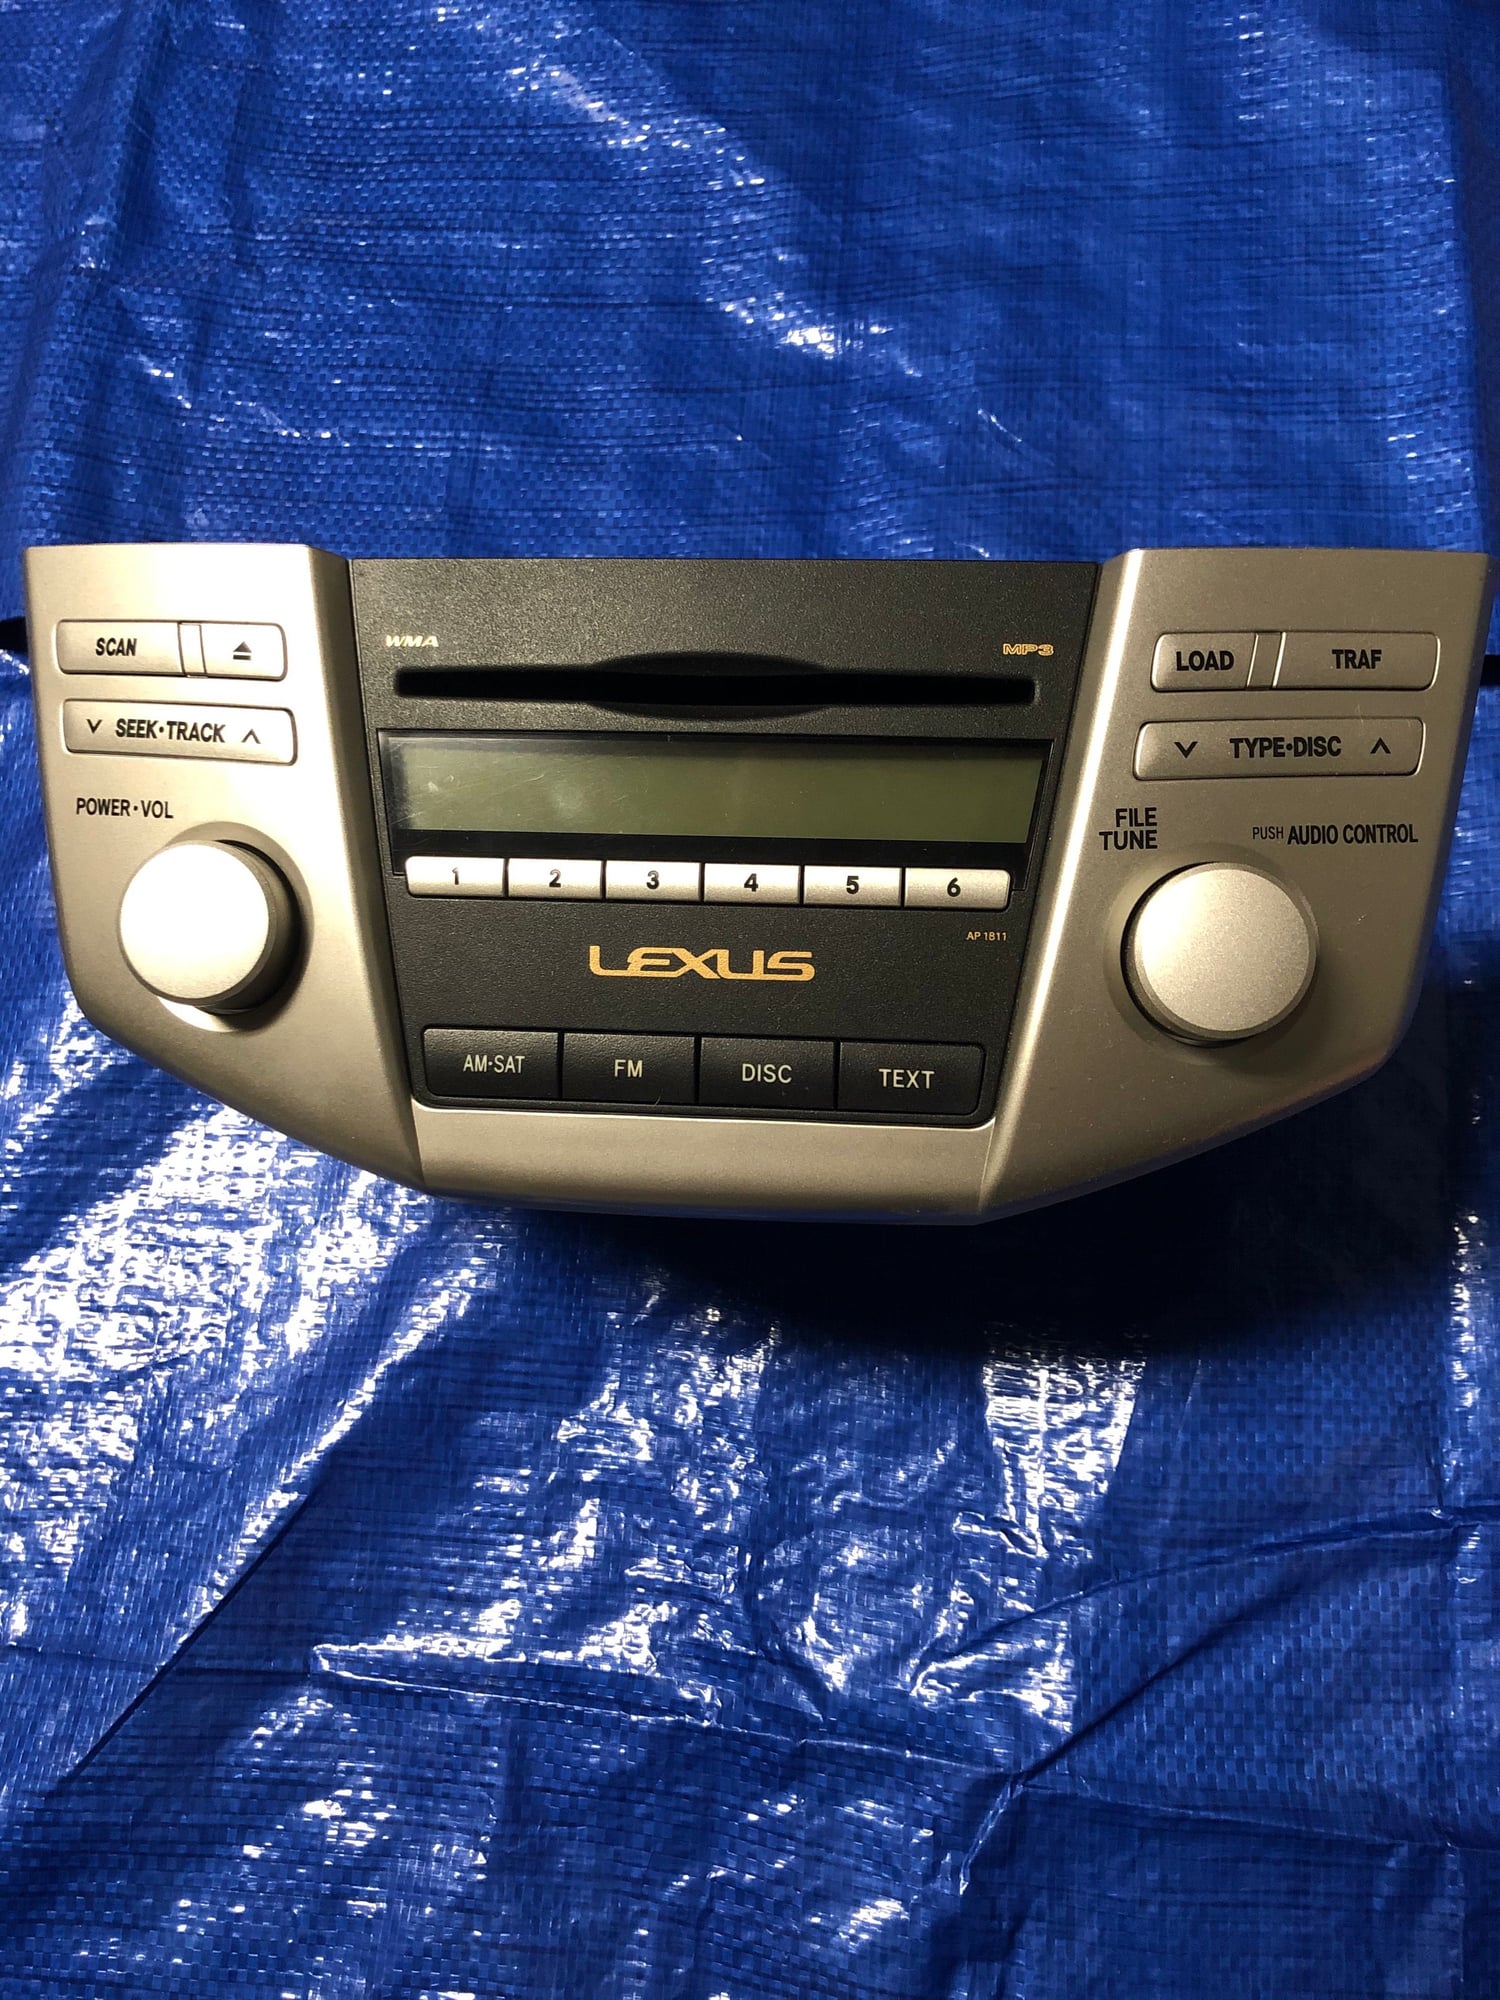 Audio Video/Electronics - 2008 Lexus RX350 Factory CD Changer -- $50 obo. - Used - 2004 to 2009 Lexus RX350 - Houston, TX 77007, United States